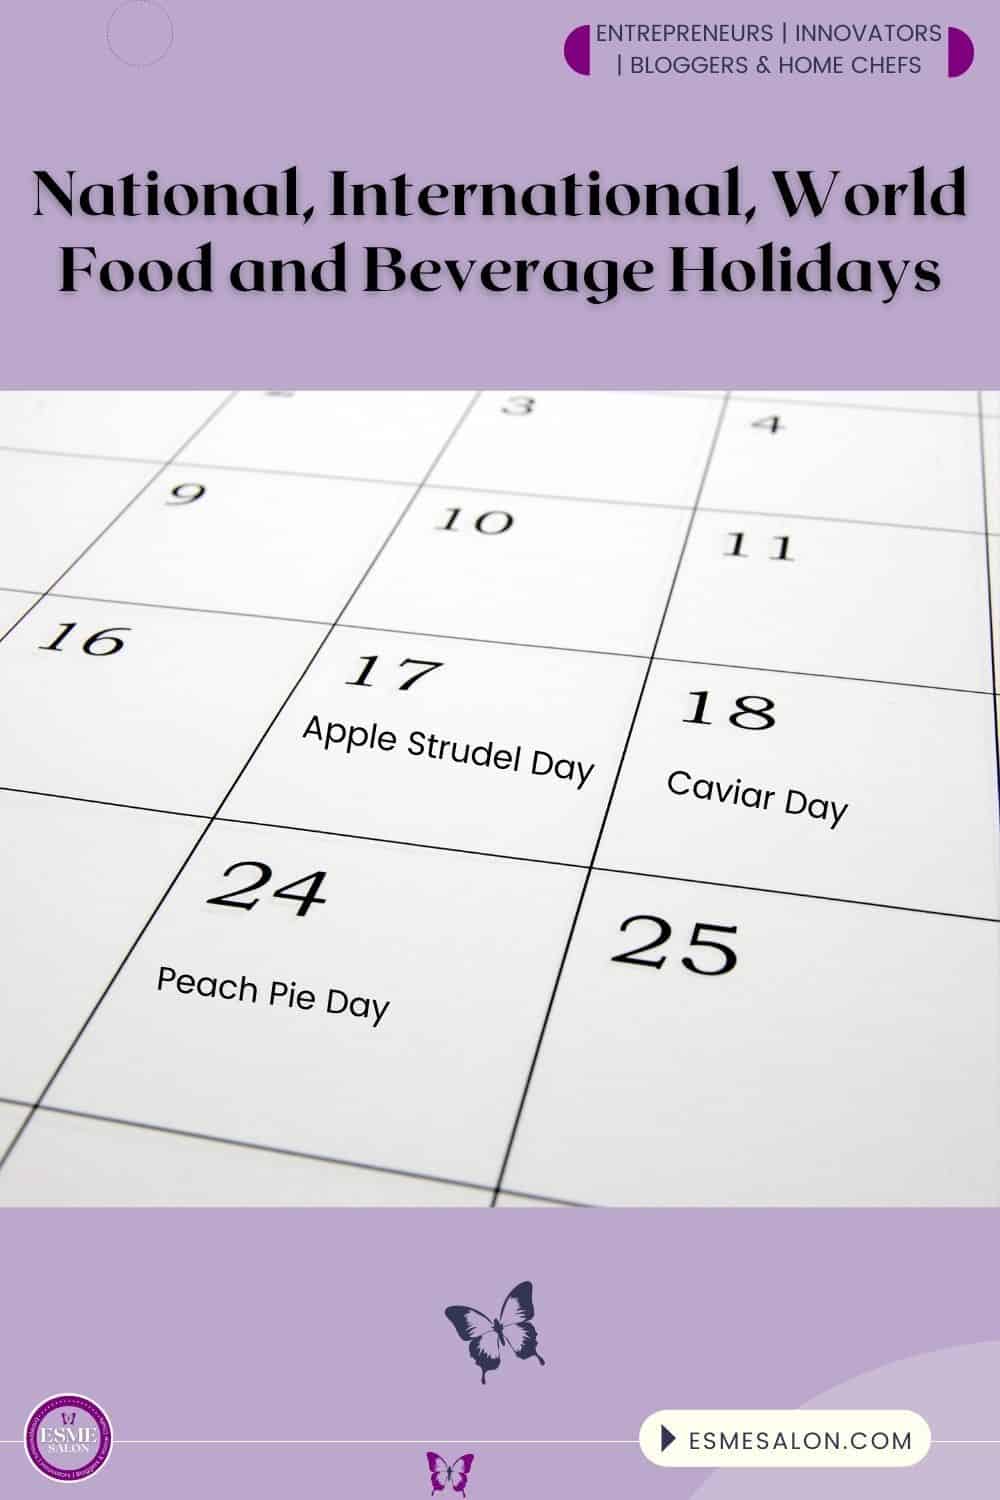 an image of a portion of a calendar showing a section of dates with food and beverage holidays listed